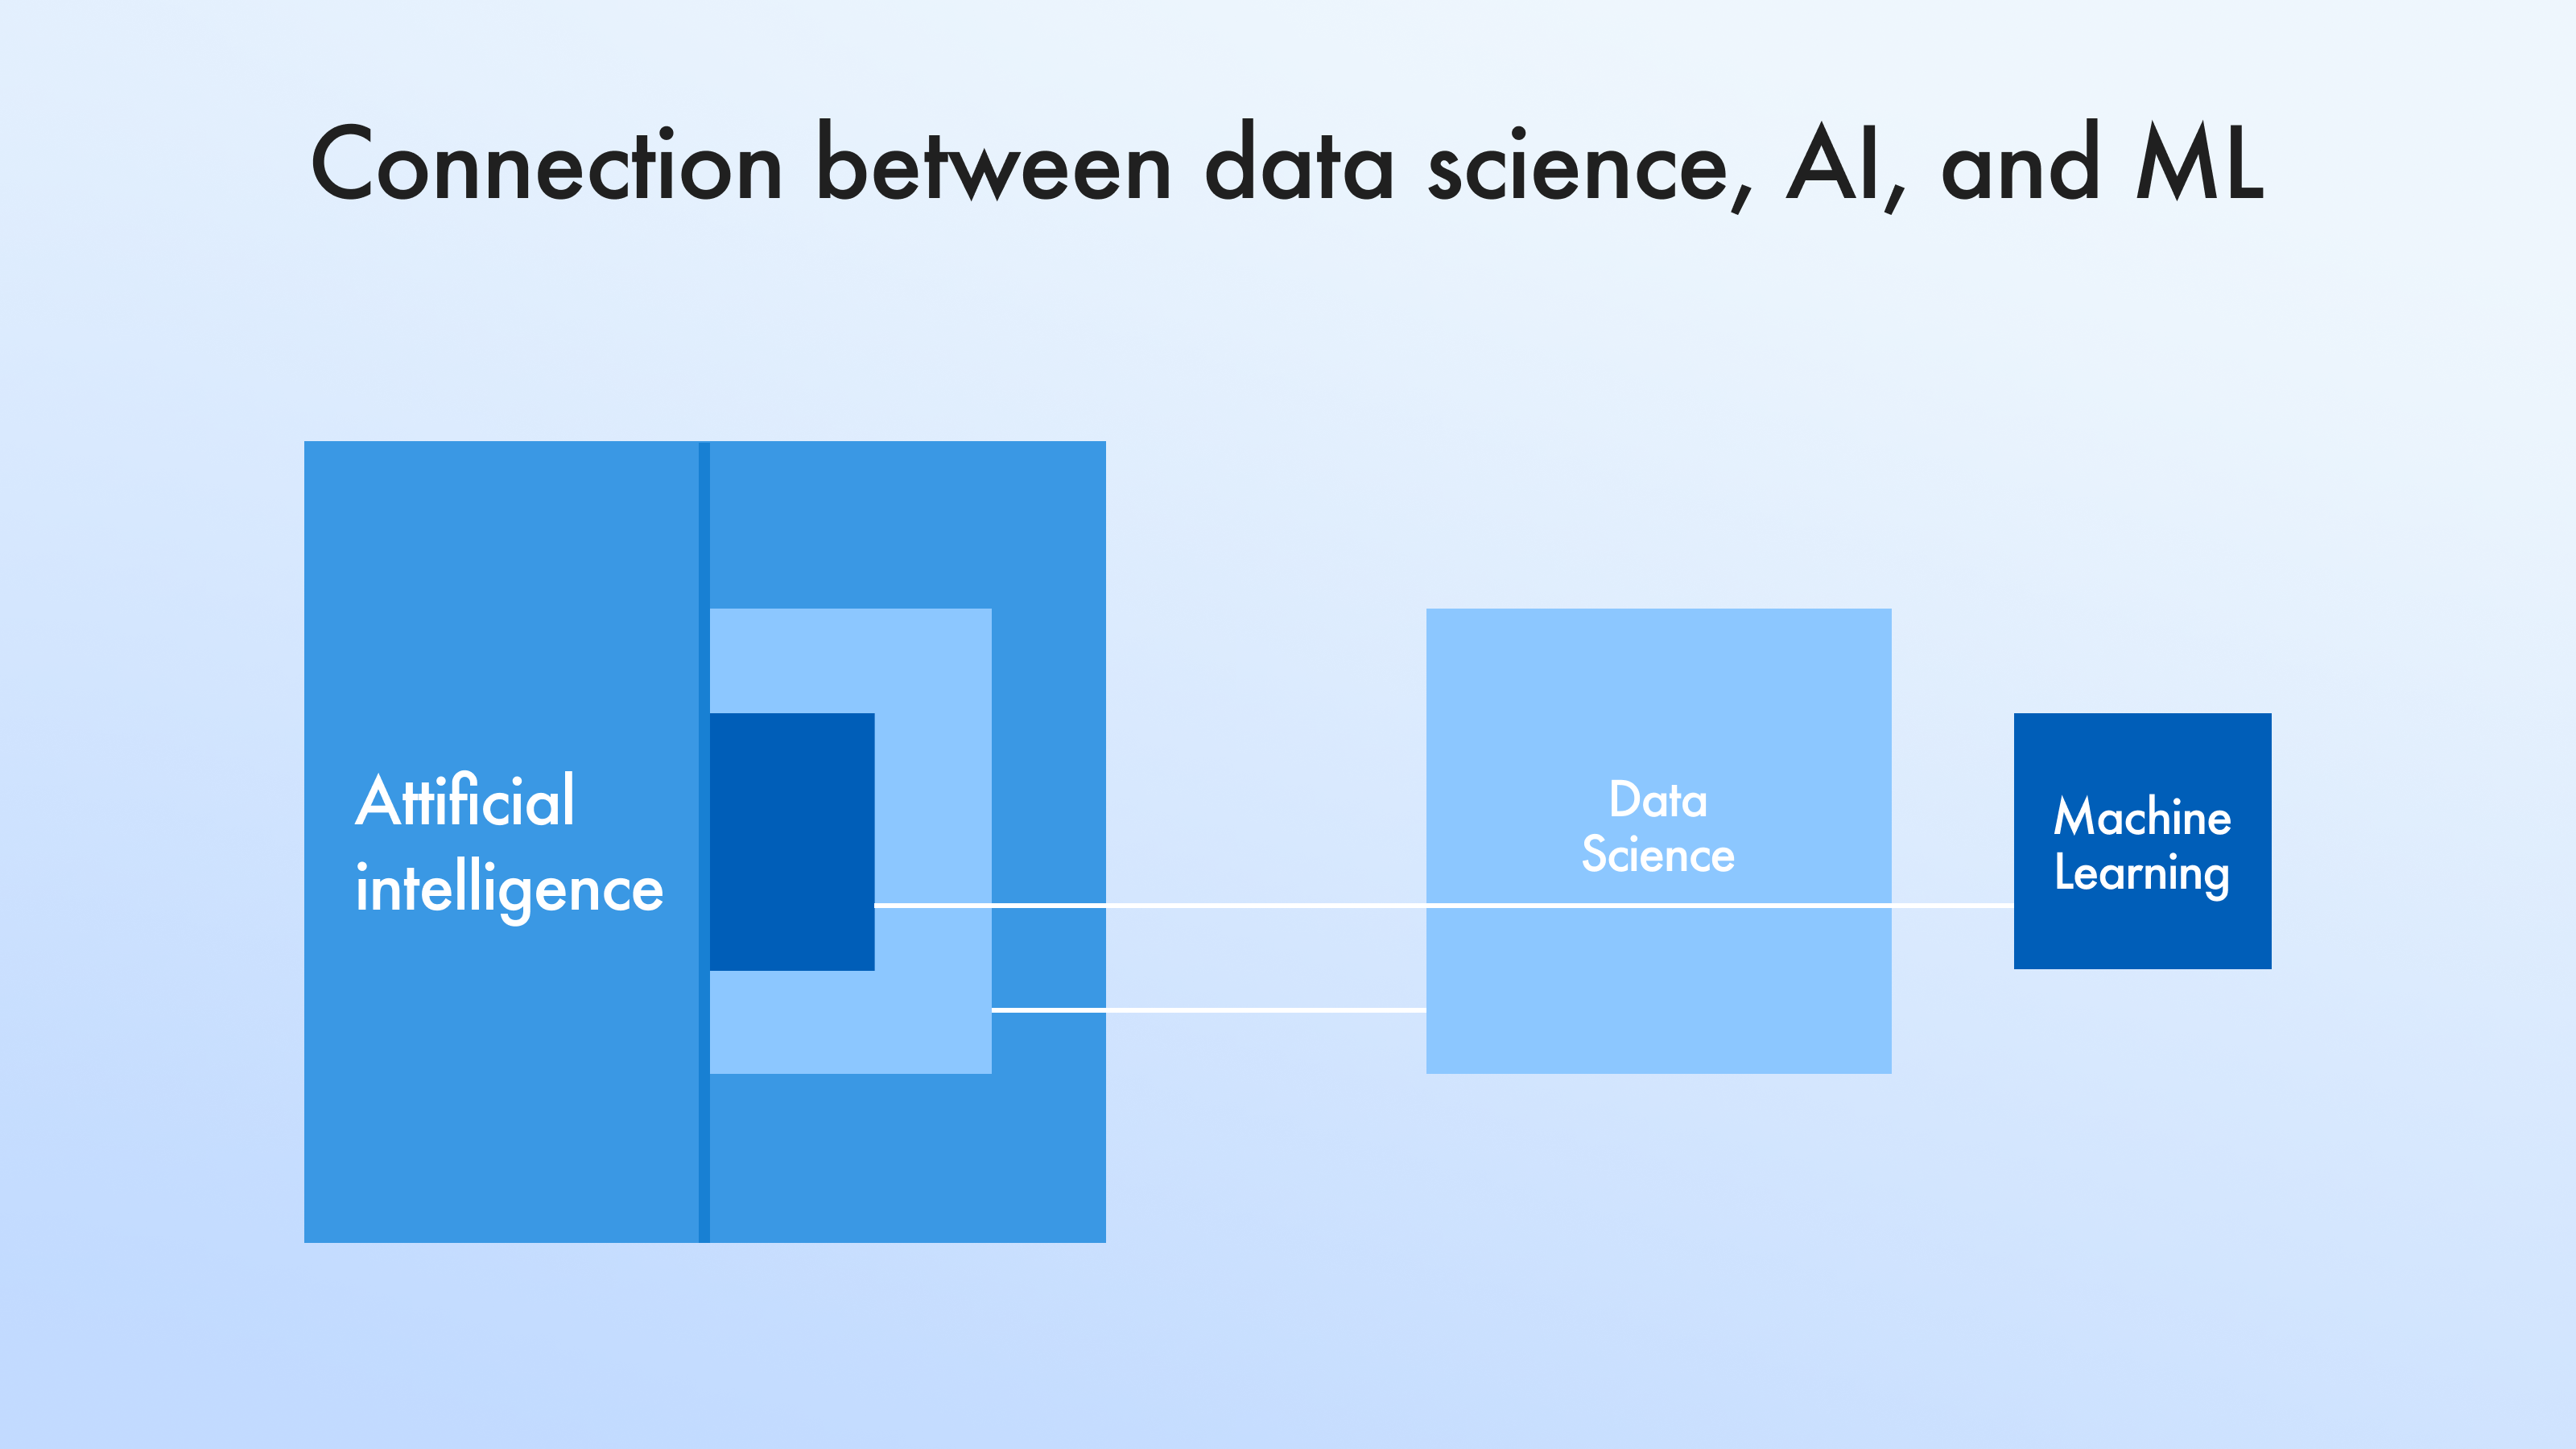 data science, AI, and ML